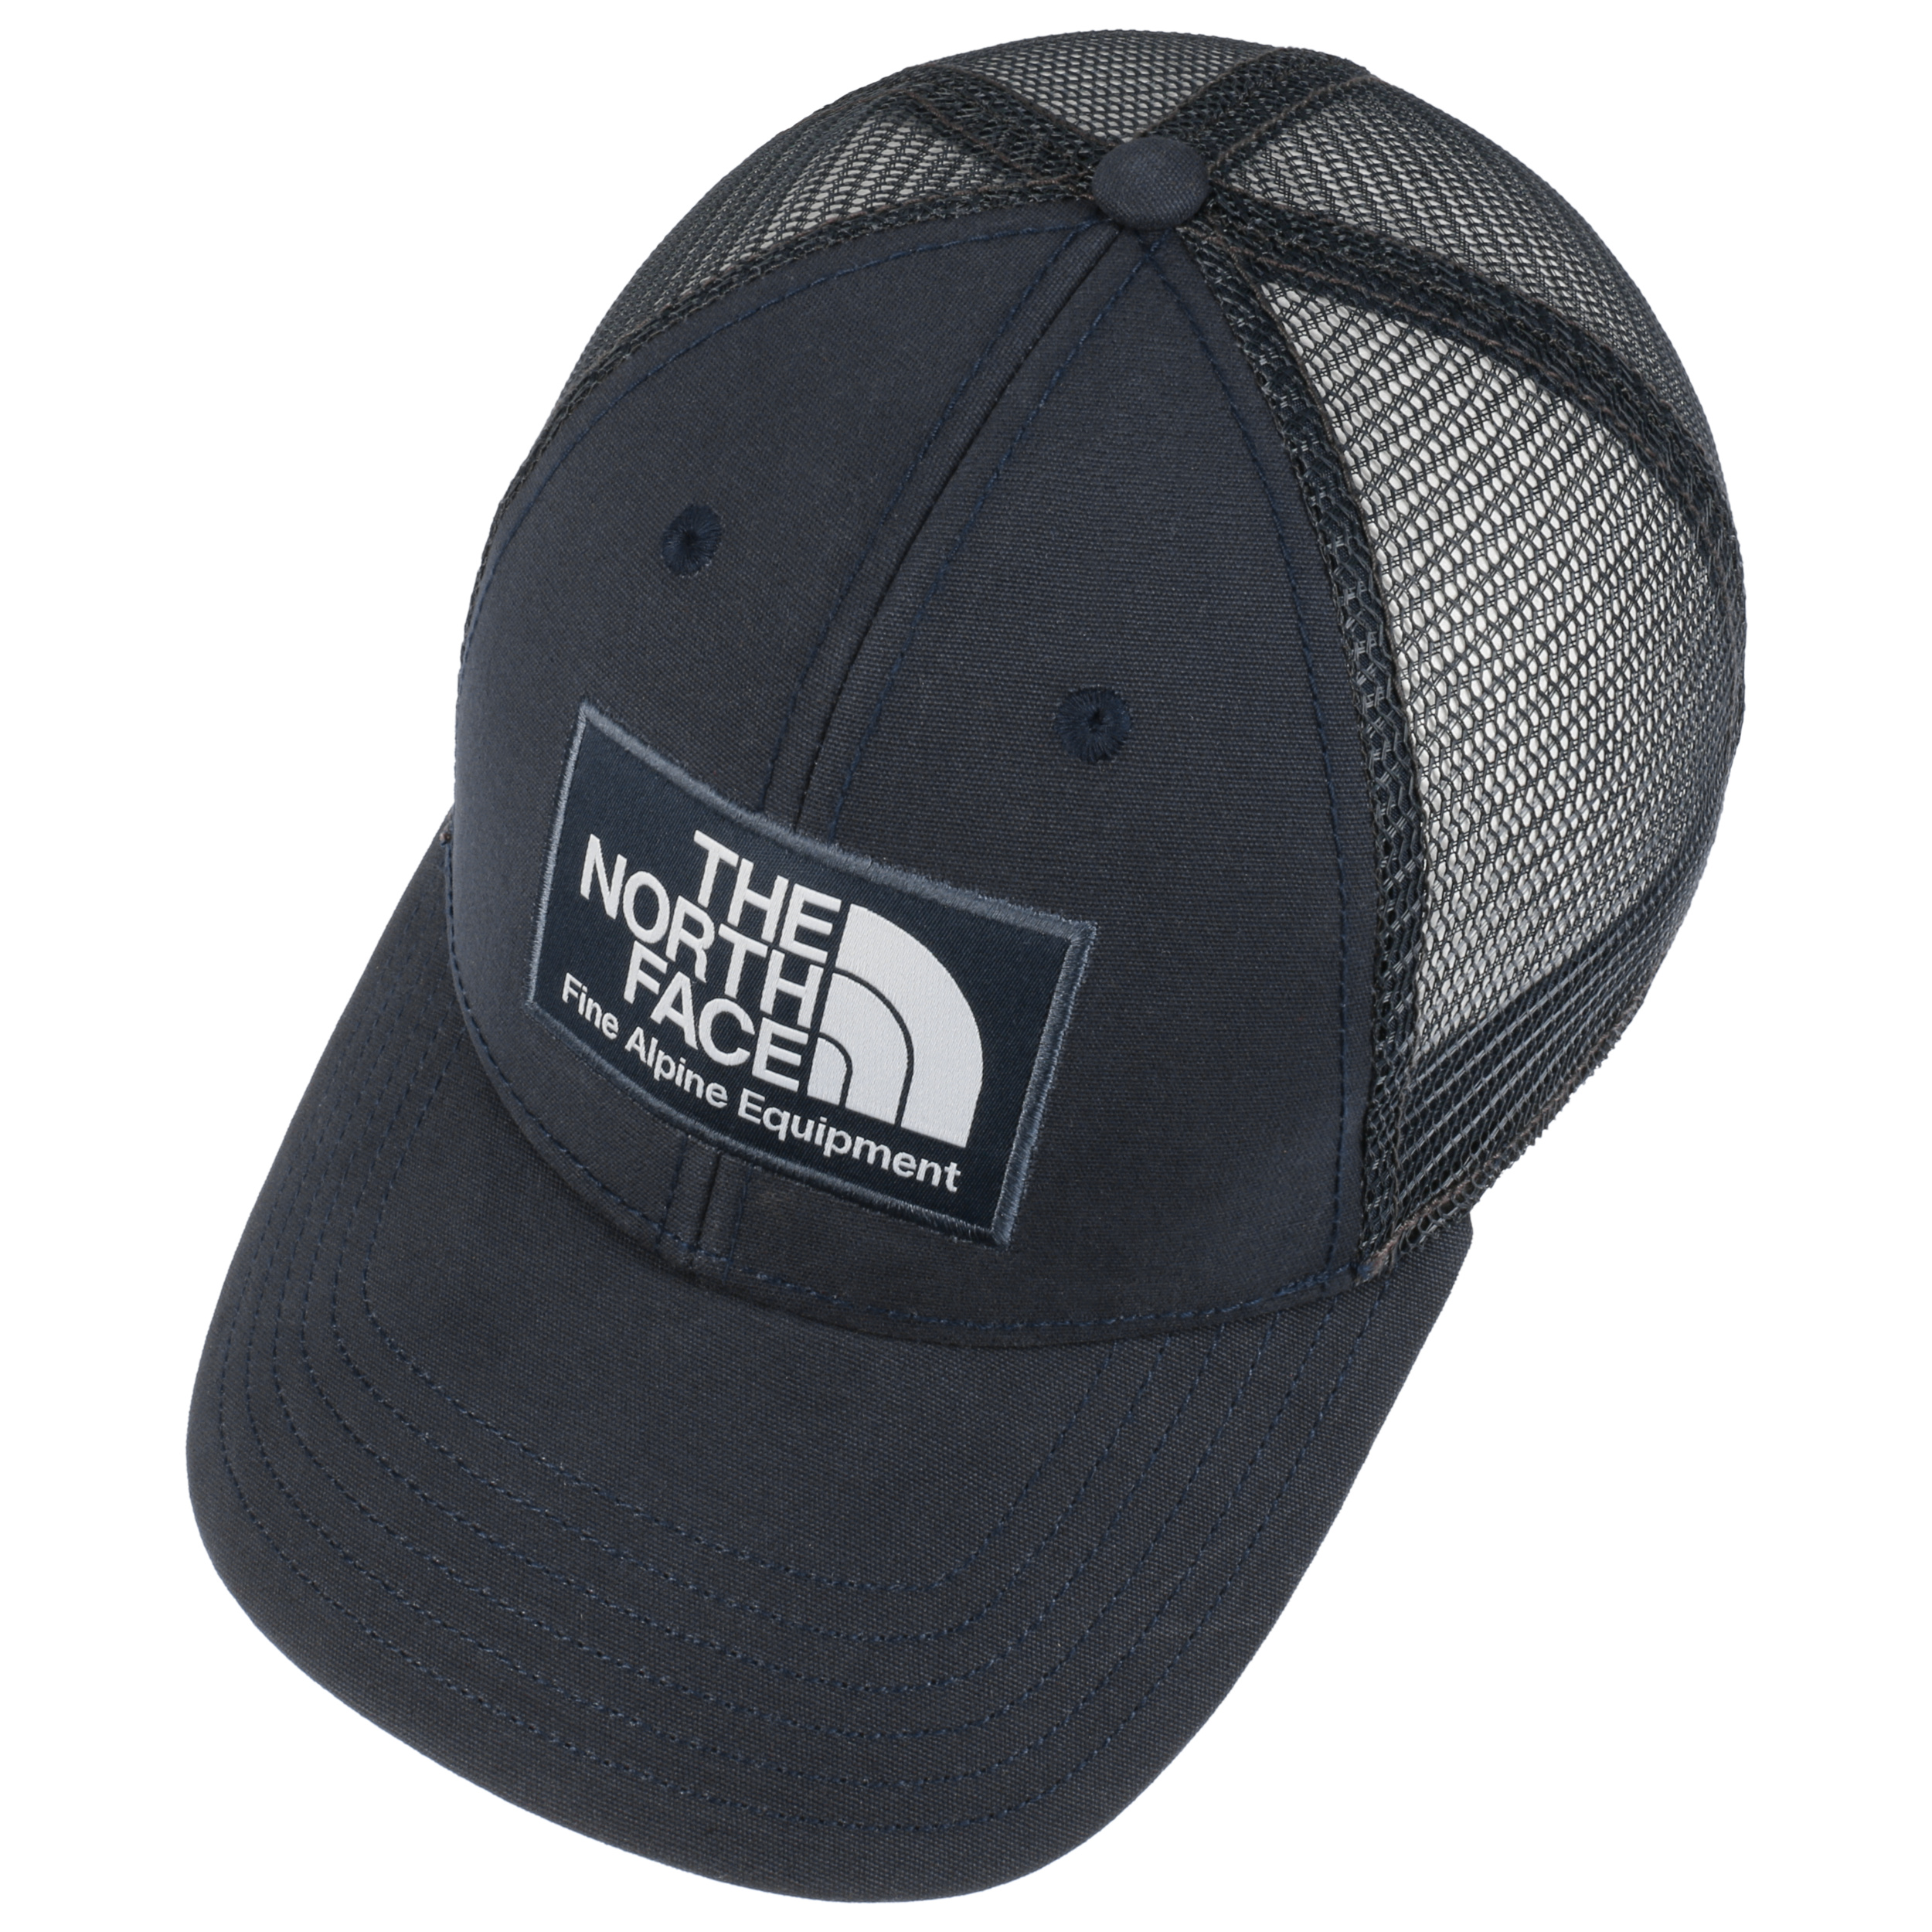 Mudder Trucker Cap by The North Face 